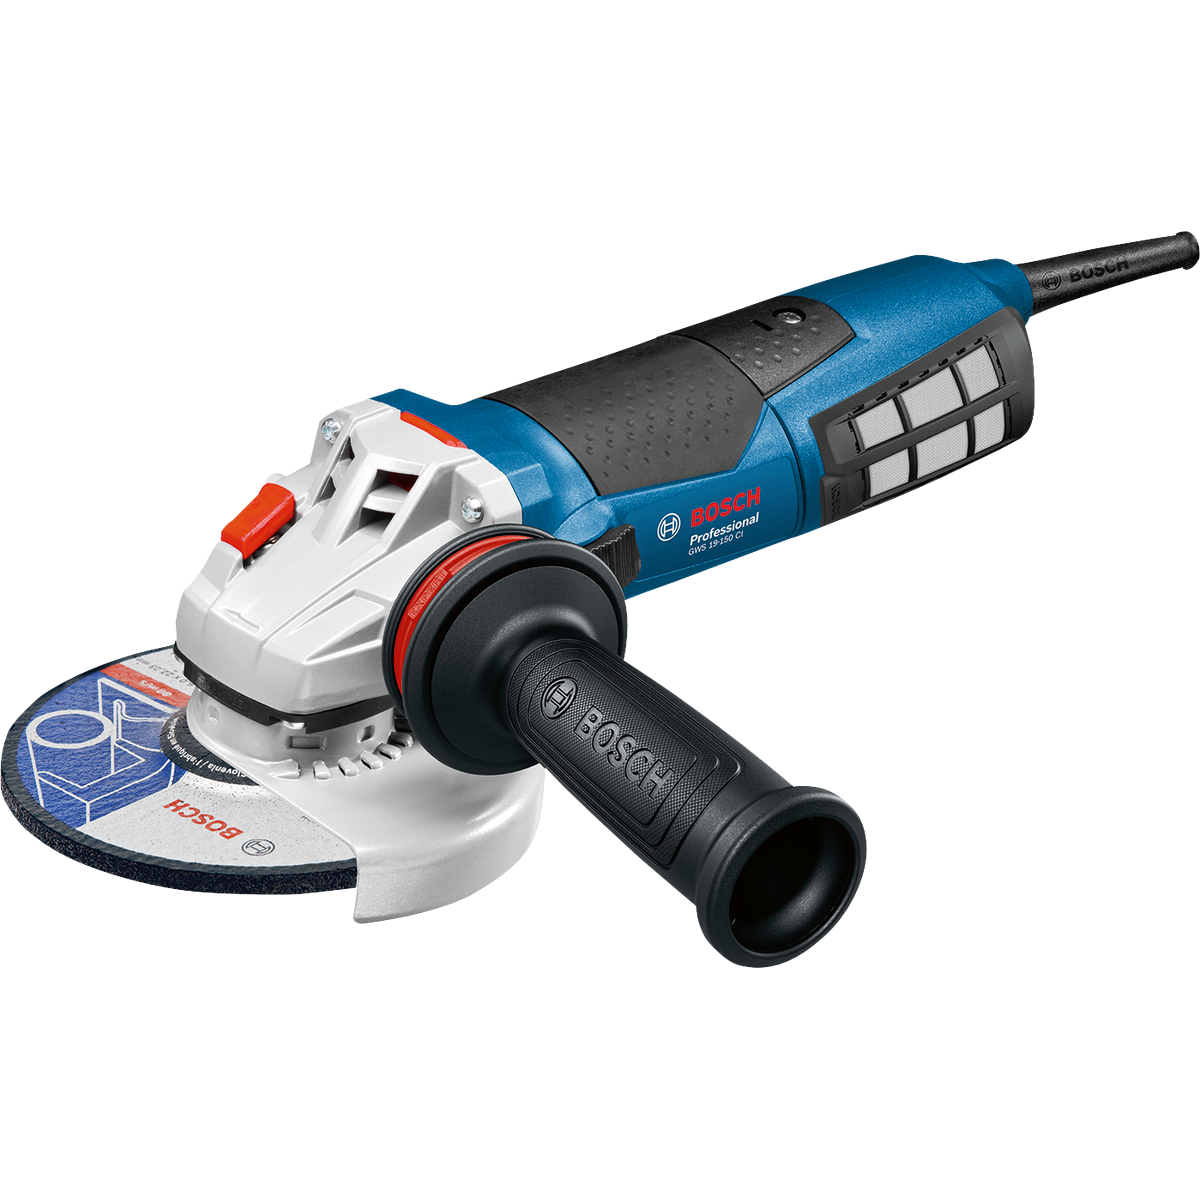 Bosch Professional Angle Grinder GWS 19-150 CI 060179R002 Power Tool Services